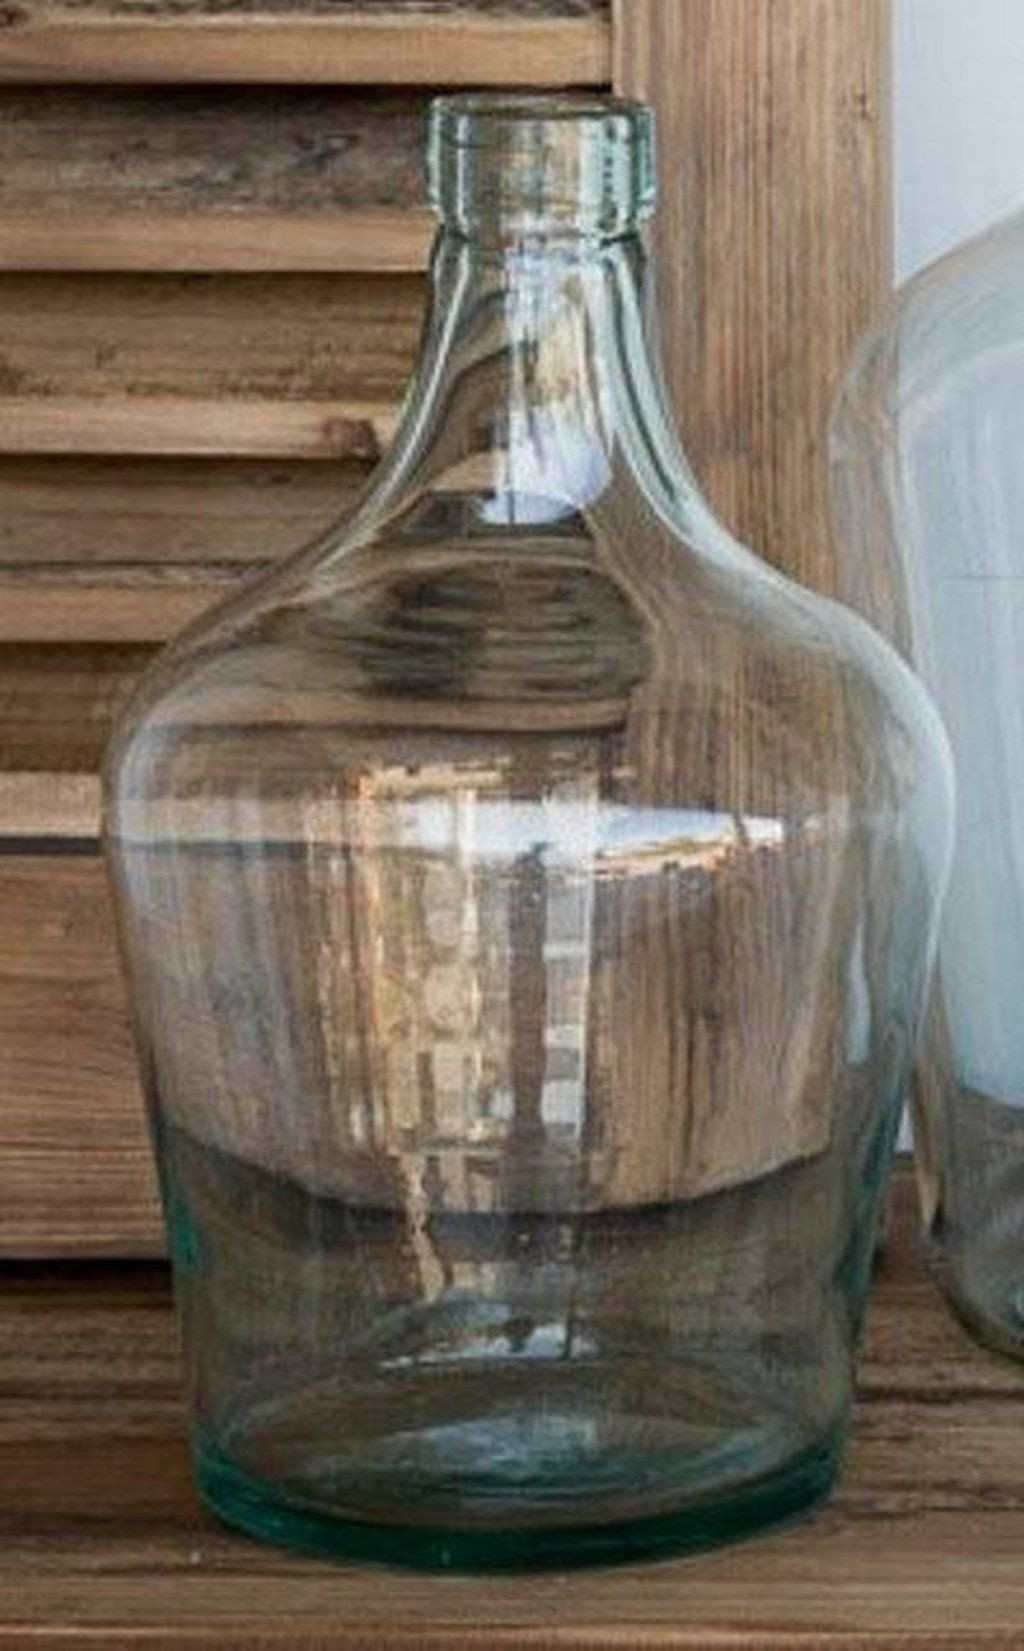 22 Recommended Glass Bottle Vase 2024 free download glass bottle vase of recycled glass cellar bottle 3 sizes bottle and products intended for recycled glass cellar bottle 3 sizes